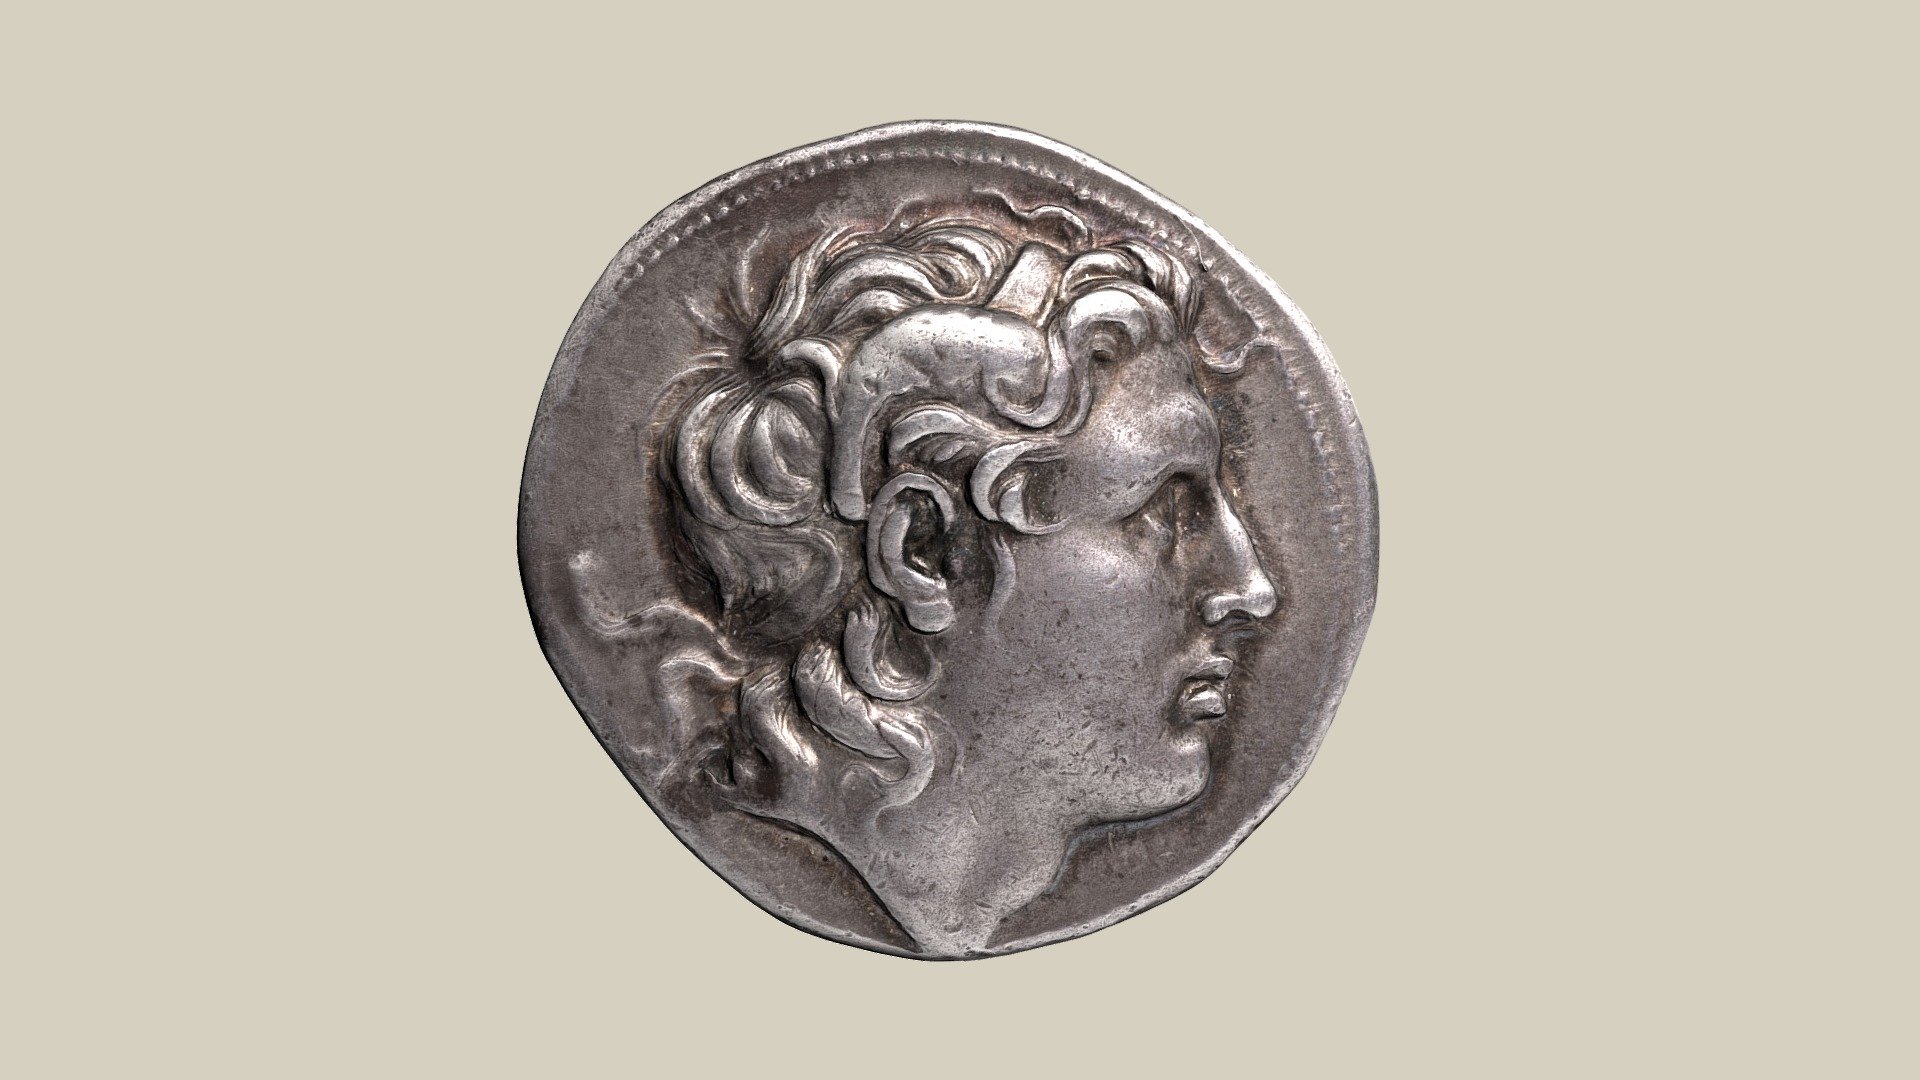 Tetradrachm with the head of Alexander the Great with Ammon's horn and diadem looking to the right. On the reverse, Athena Nikephoros sits in armor with shield and spear. Athena's nickname &ldquo;Nikephoros